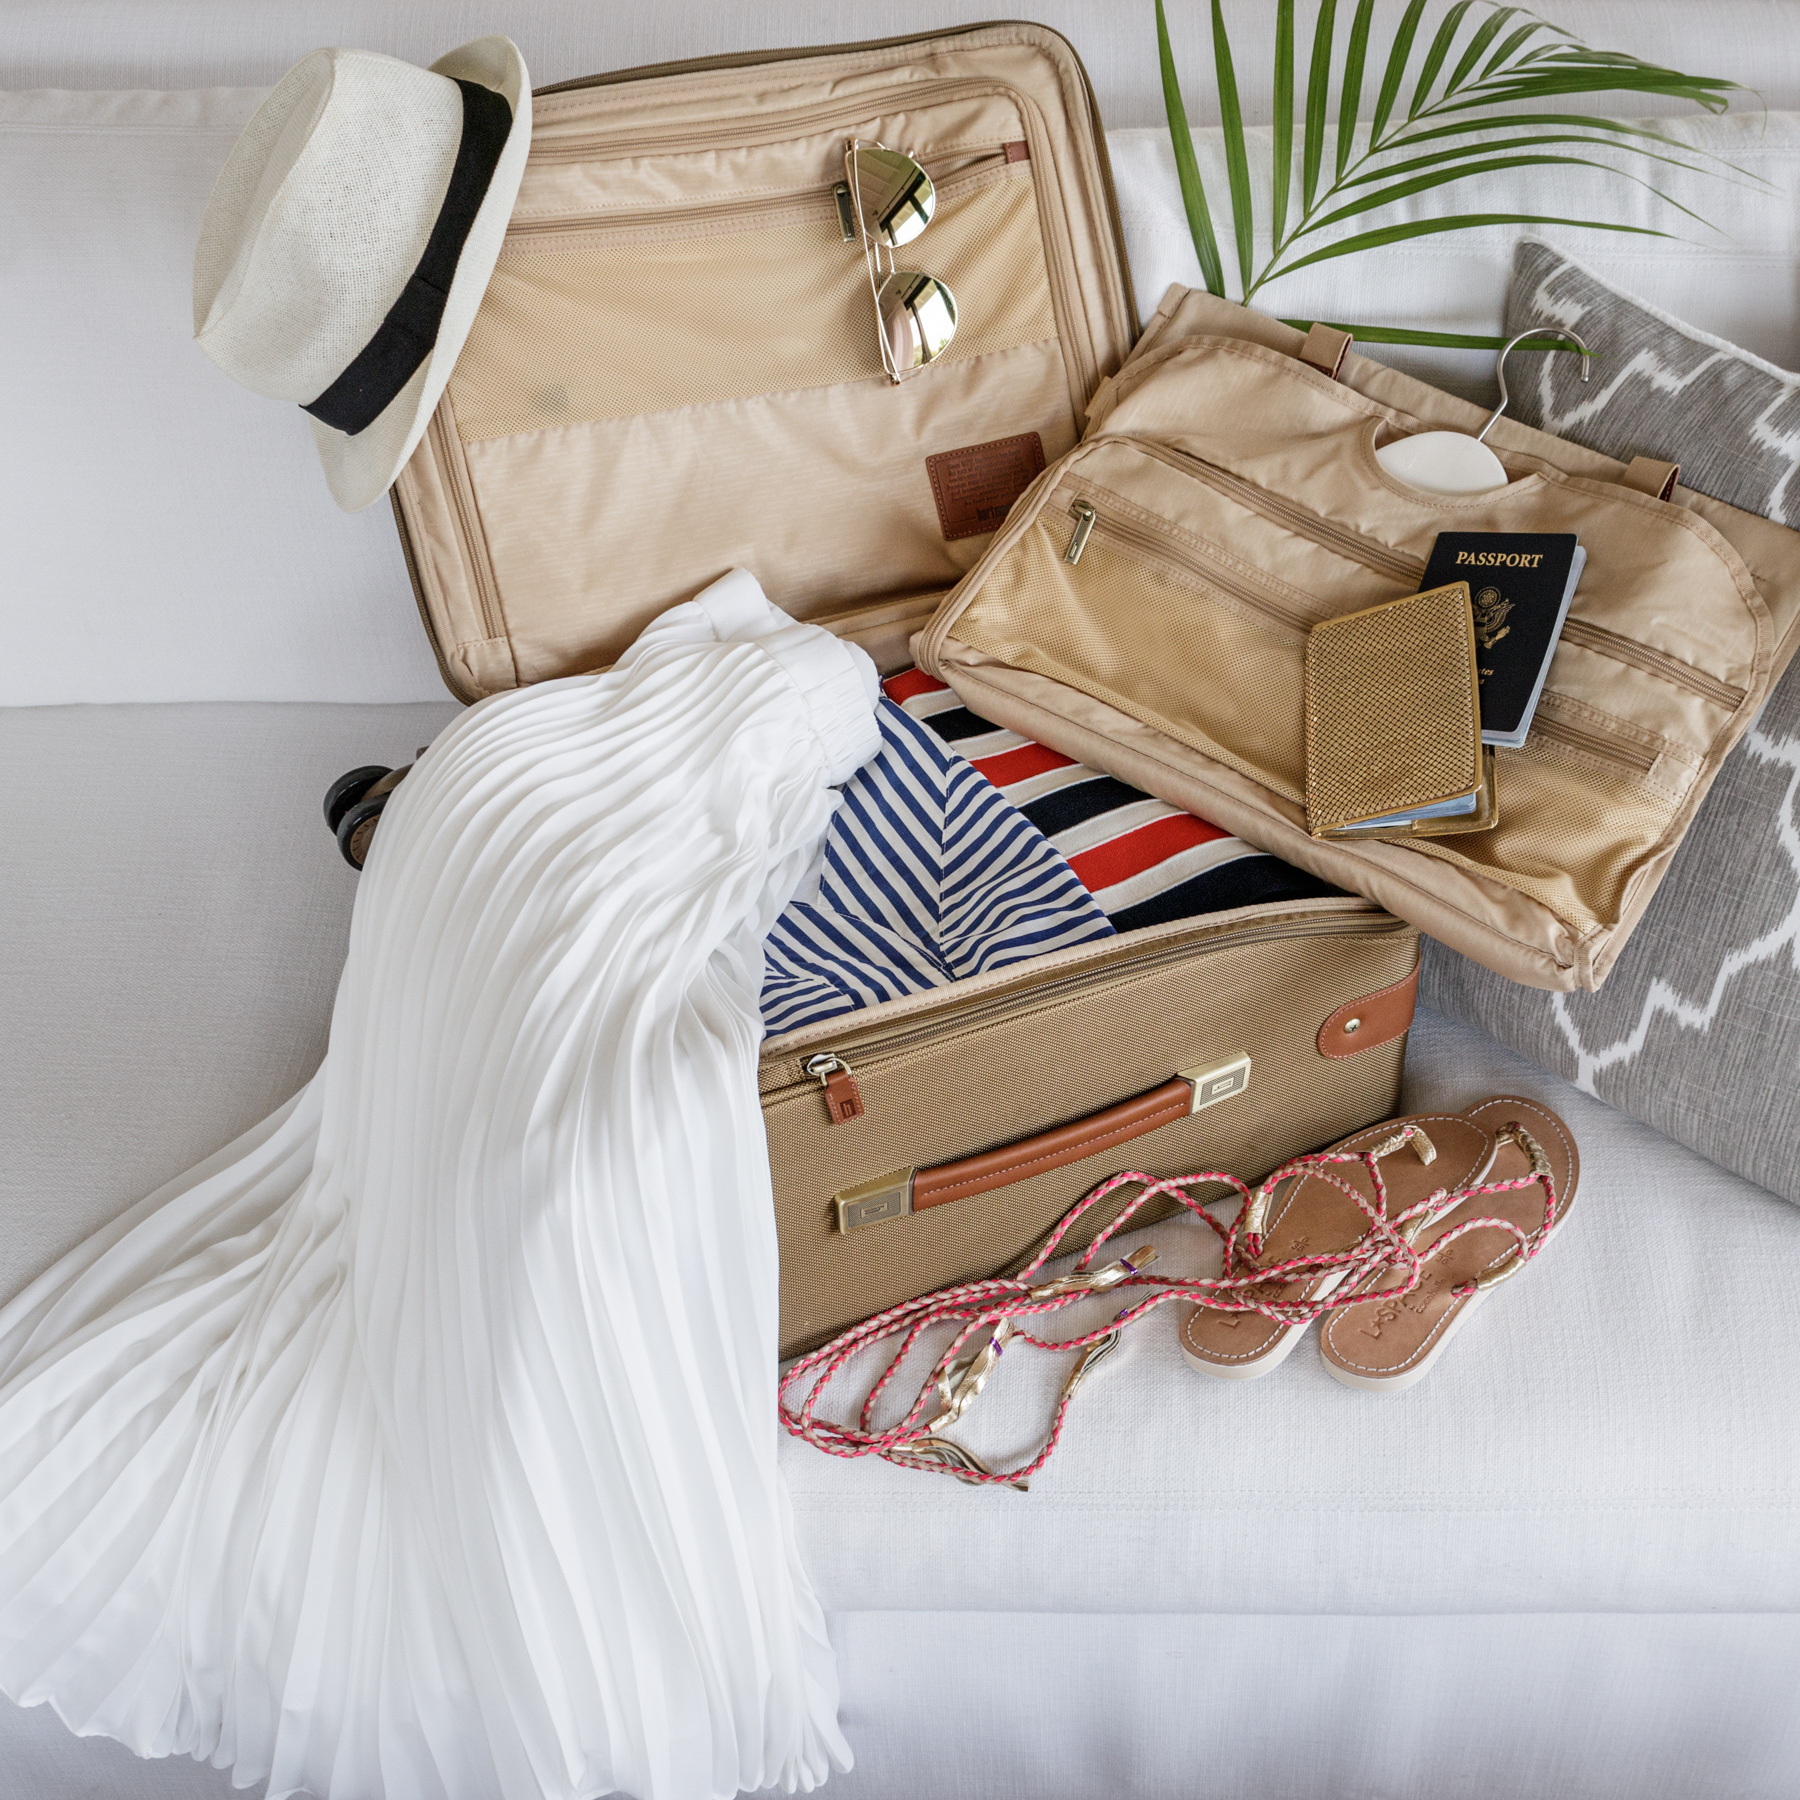 Carry-On Packing Essentials - Ultimate Packing Guide For A Tropical Getaway: Essentials | NotJessFashion.com